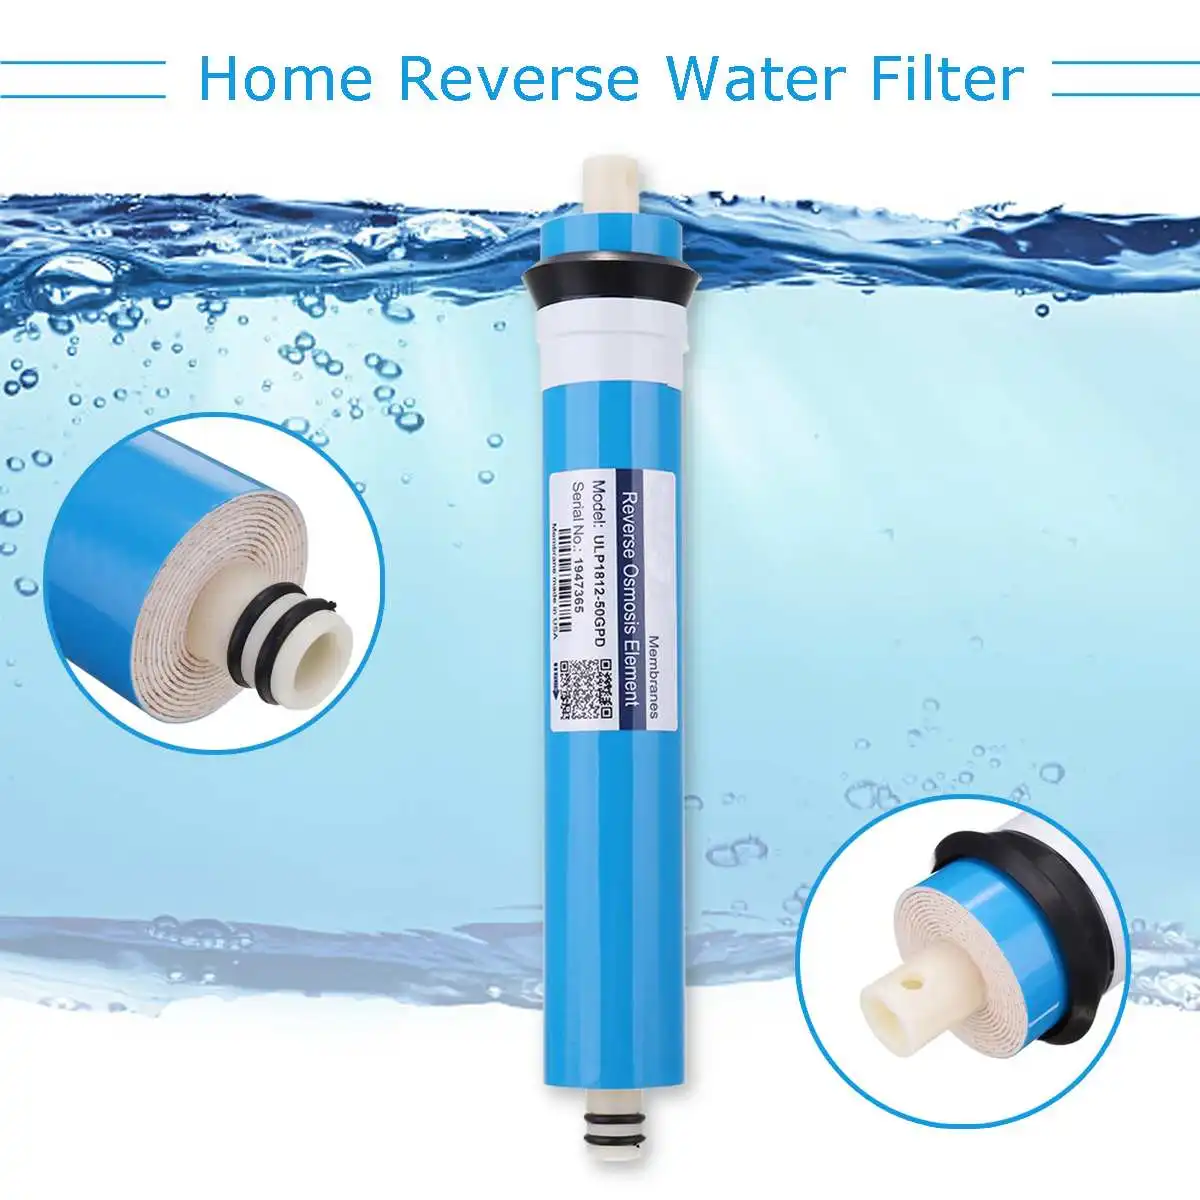 50/75/100/125/400GPD Home Kitchen Reverse Osmosis RO Membrane Replacement Water System Filter Water Purifier Drinking Treatment vorm ro membrane 100gpd 1812 ro membrane housing reverse osmosis water filter system parts free shipping